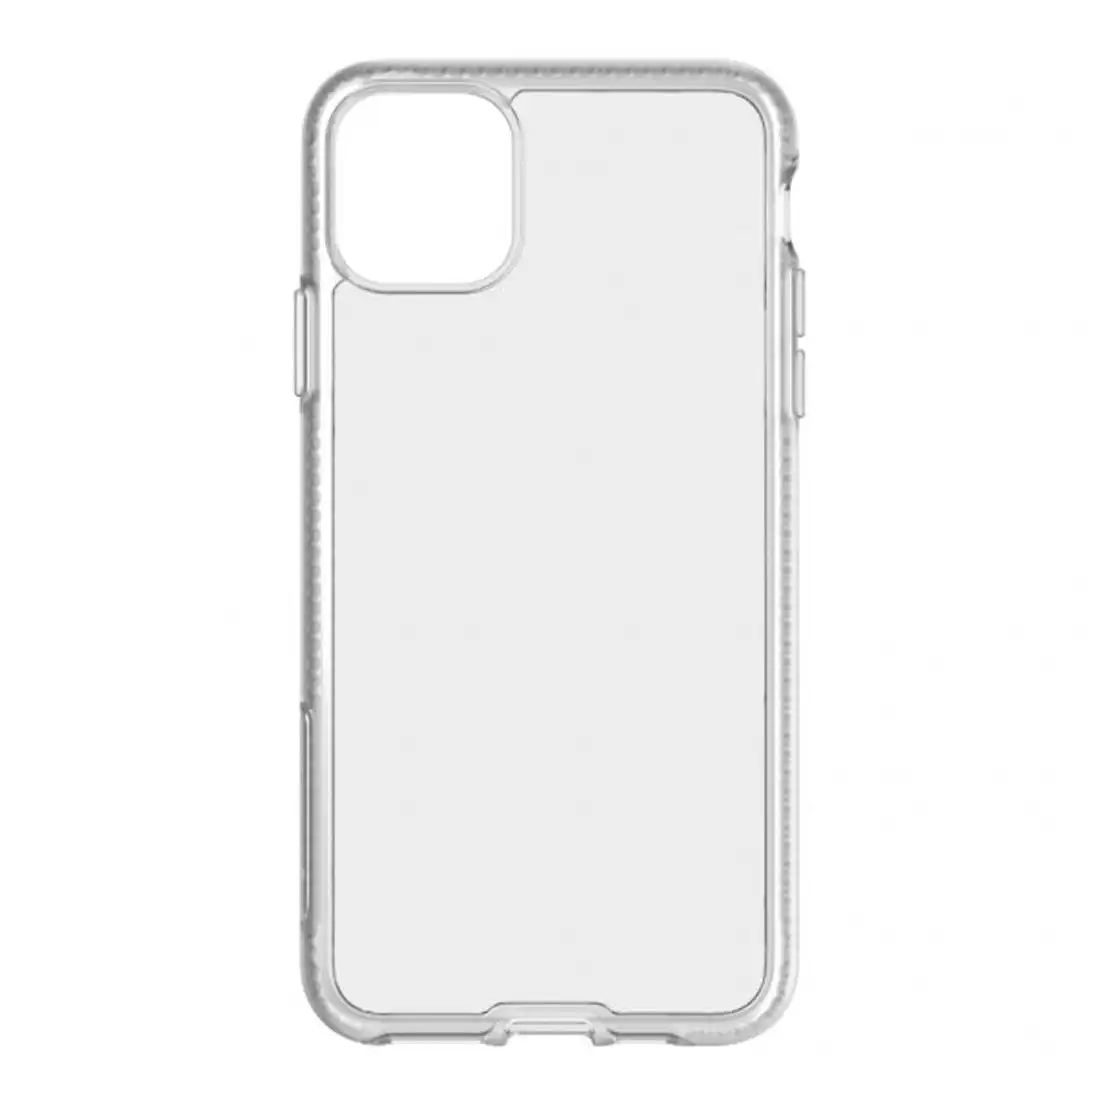 Tech21 Pure Clear Case for iPhone 11 Pro Max T21-7277 - Clear